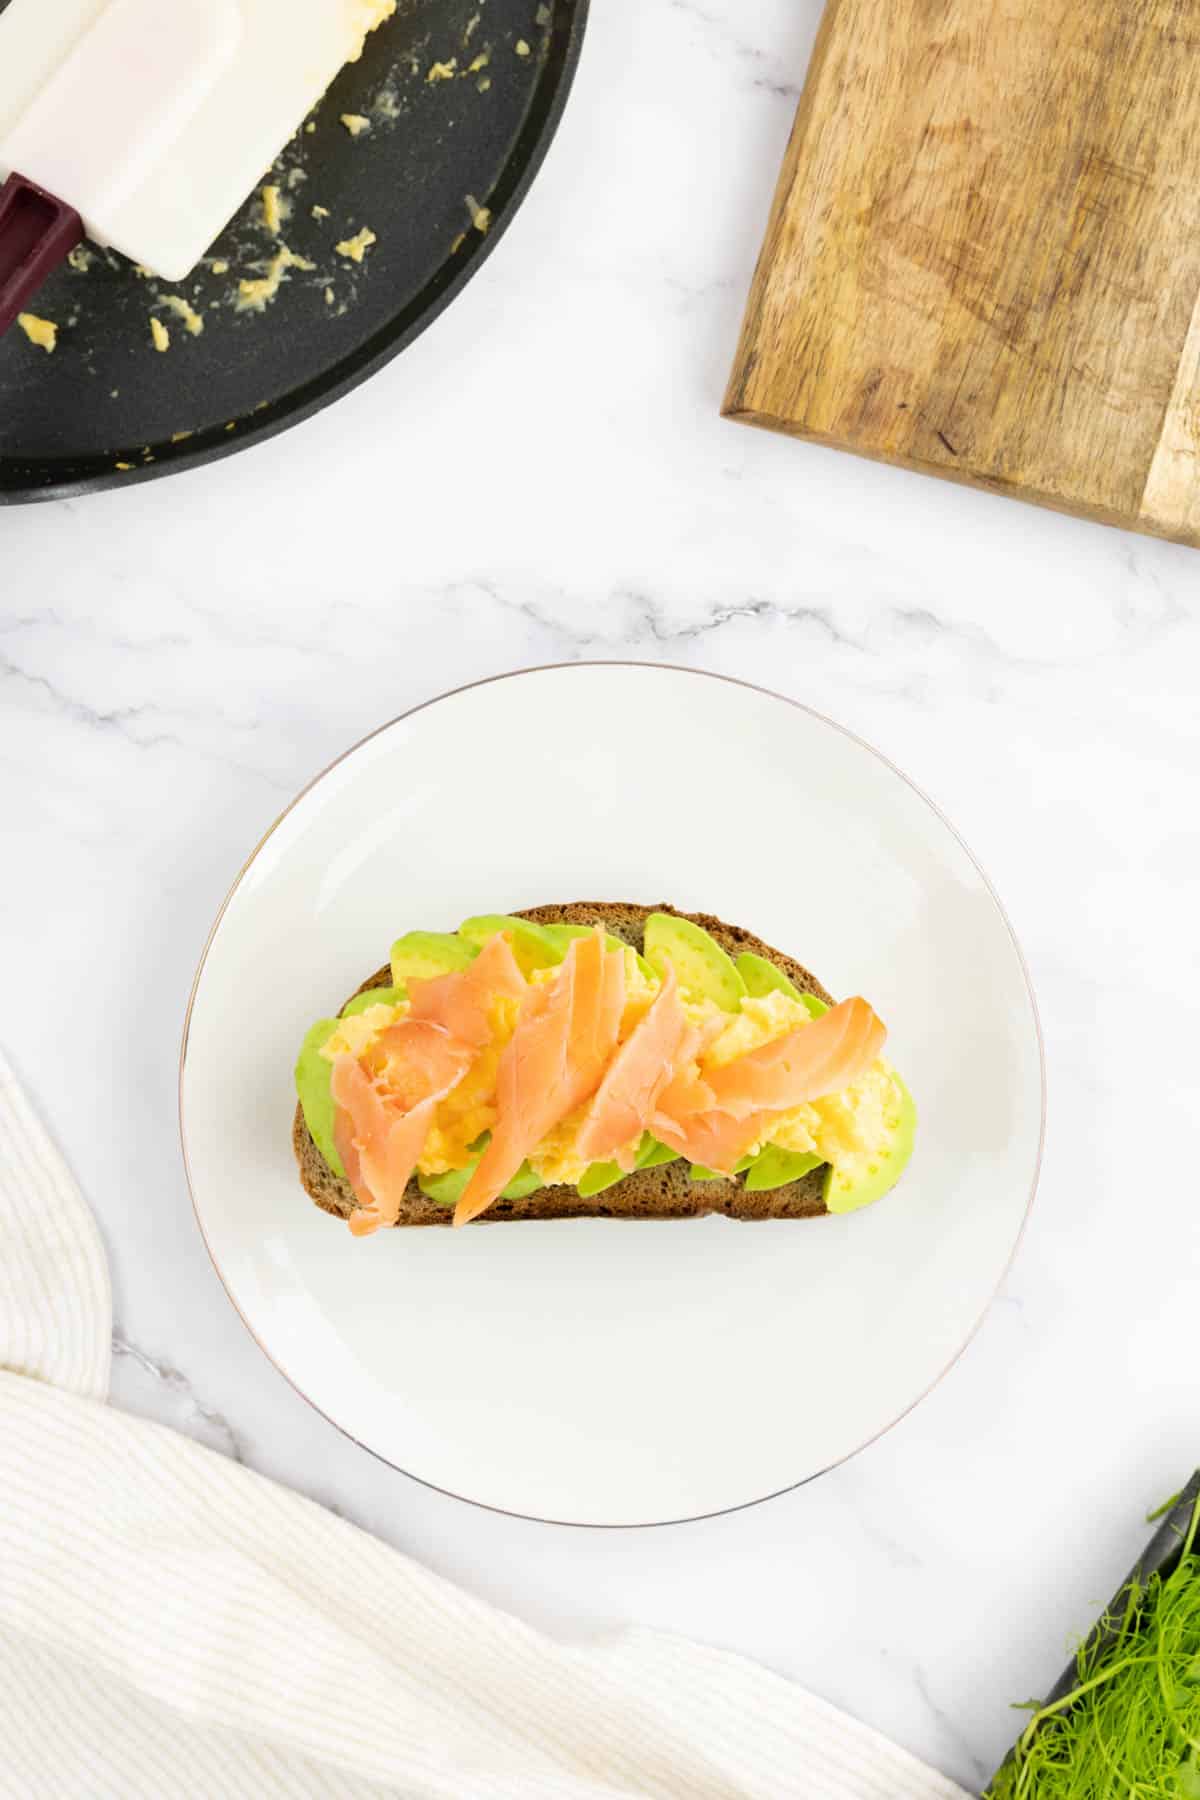 Sliced avocado on toast topped with scrambled eggs and smoked salmon